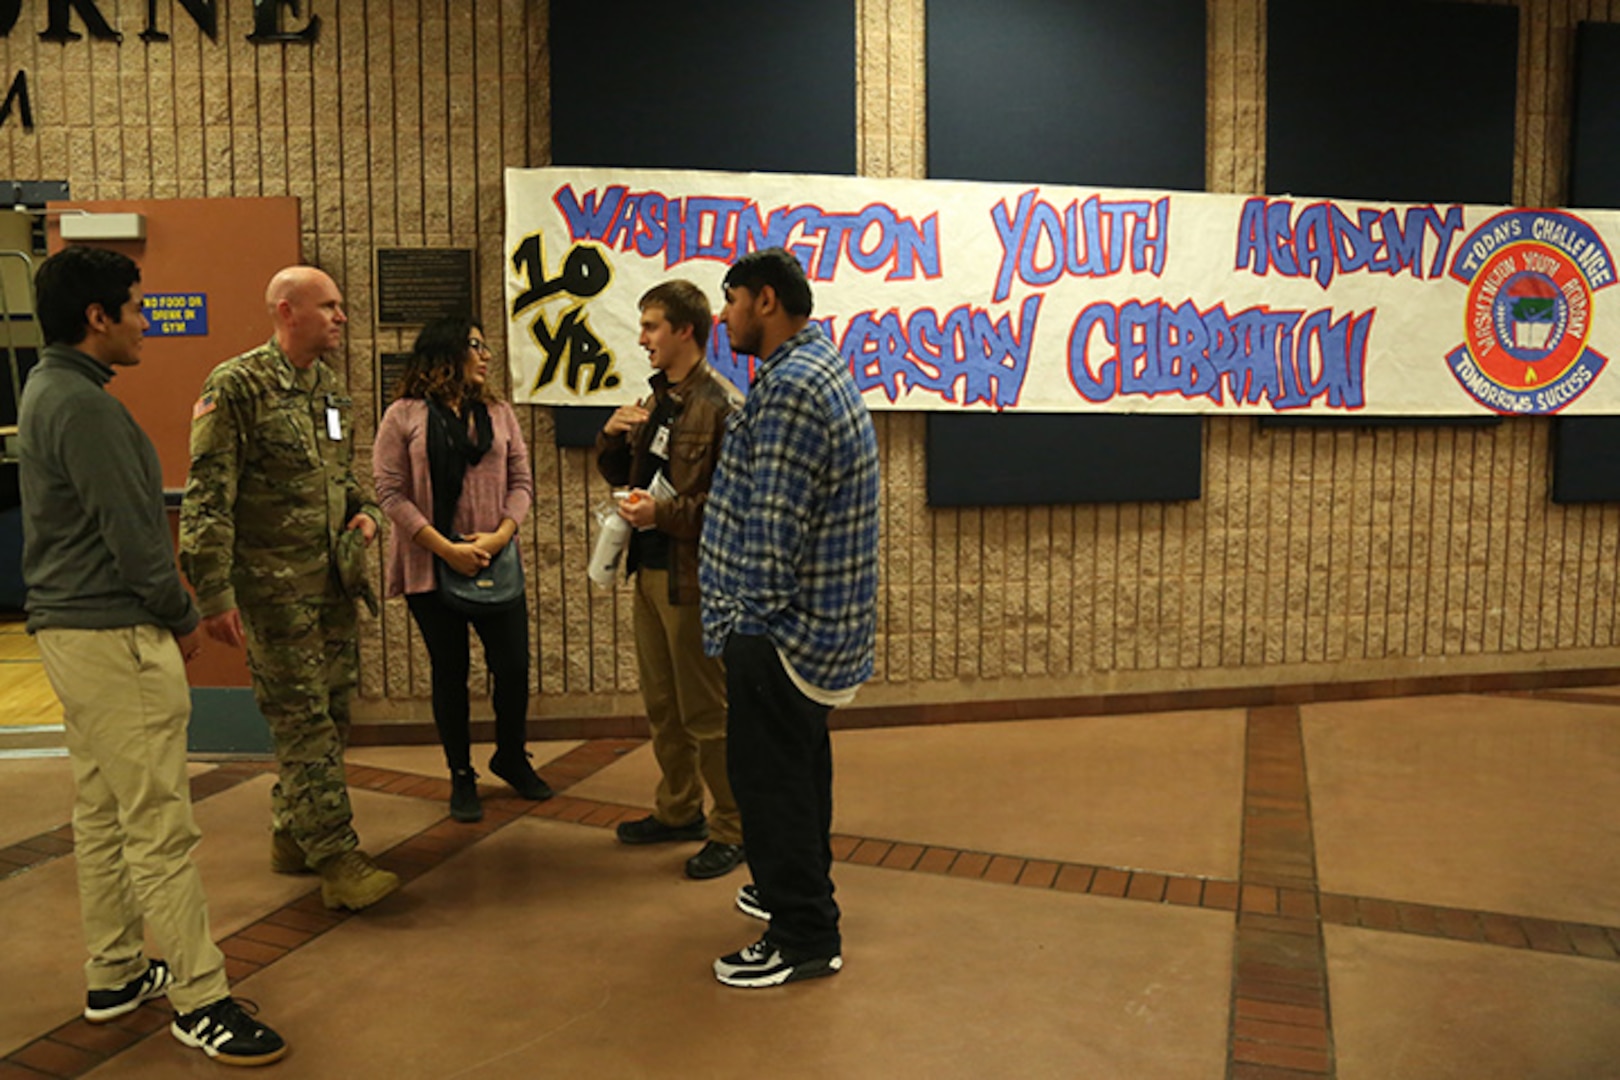 Washington Youth Academy 1st Lt. Darrell Stoops talks with former graduates of the WYA during the academies 10-year anniversary ceremony Nov. 18, 2018, in Bremerton, Wash. The ceremony brought together former and current graduates as a way to reconnect with past graduates, as well as show the current class the success the program can lead to.